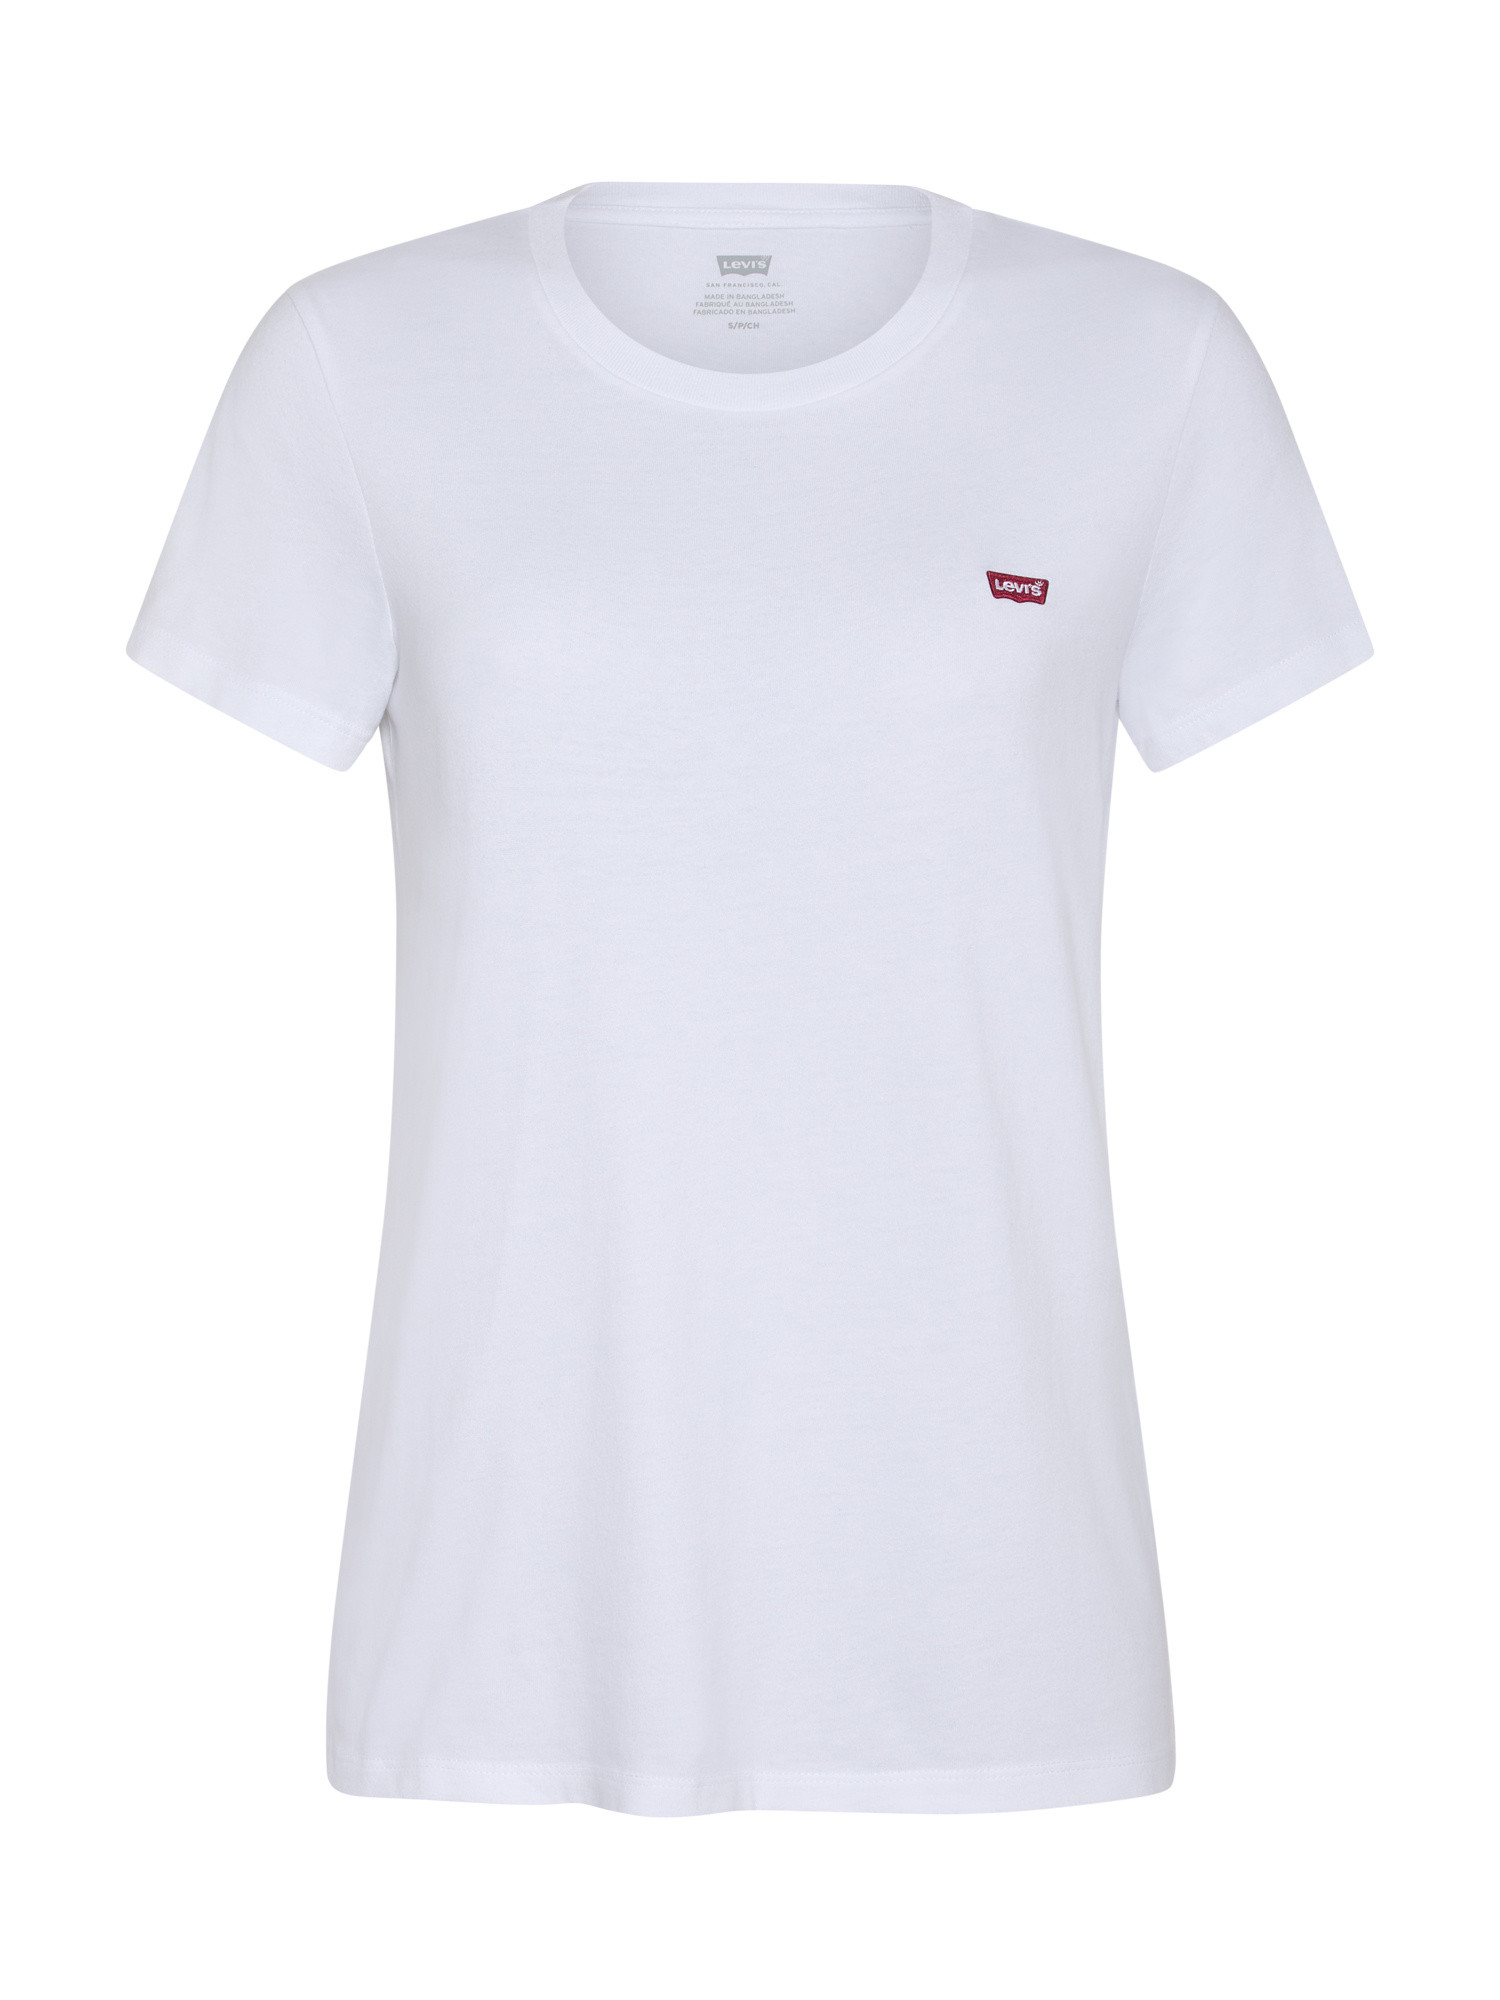 Perfect Tee, White, large image number 0